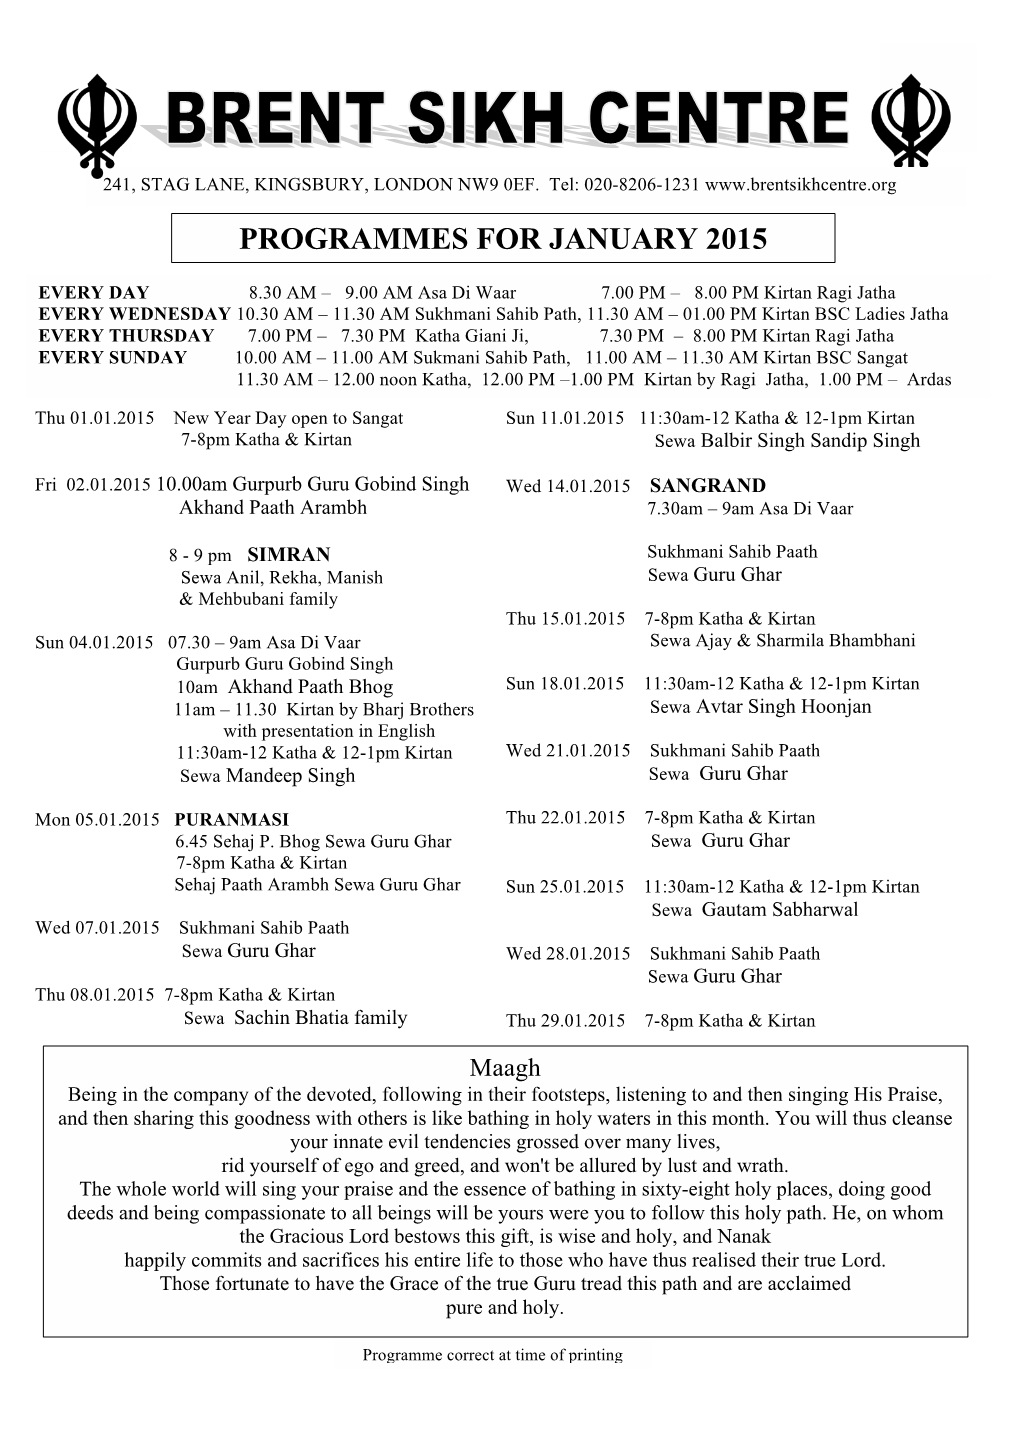 PROGRAMMES for JANUARY 2015 A